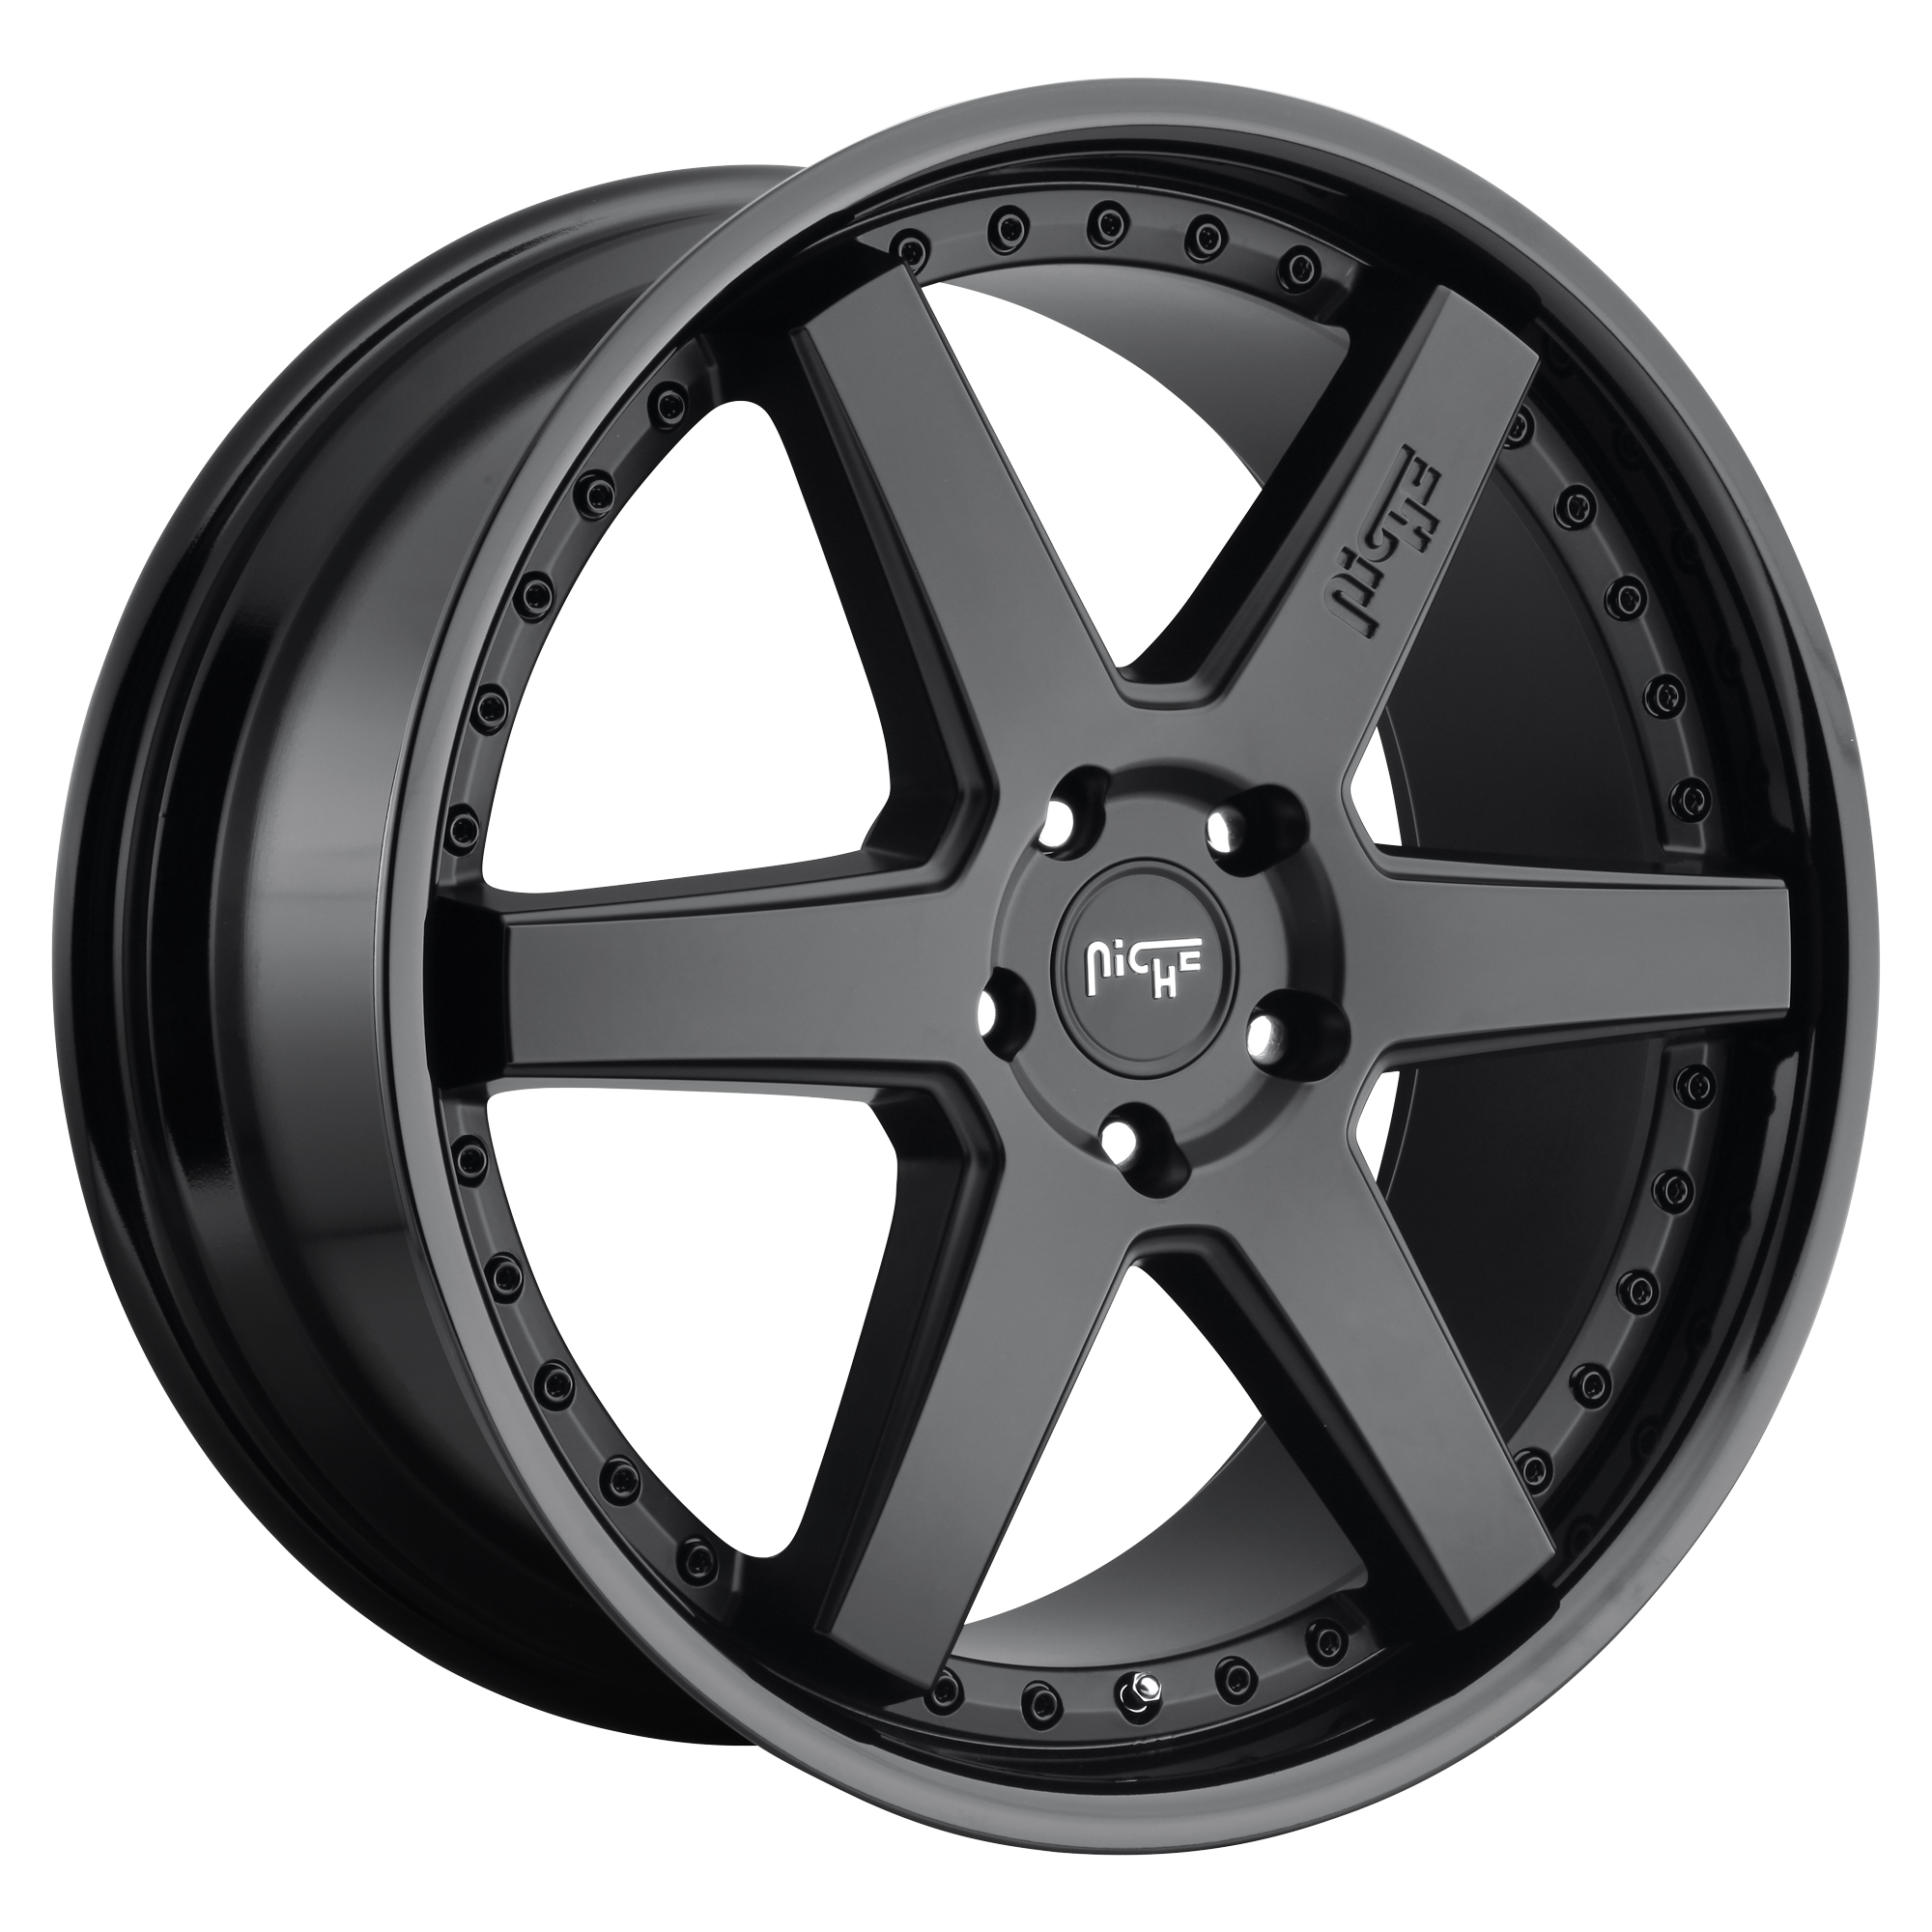 ALTAIR 18x8.5 5x114.30 GLOSS BLACK MATTE BLACK (45 mm) - Tires and Engine Performance